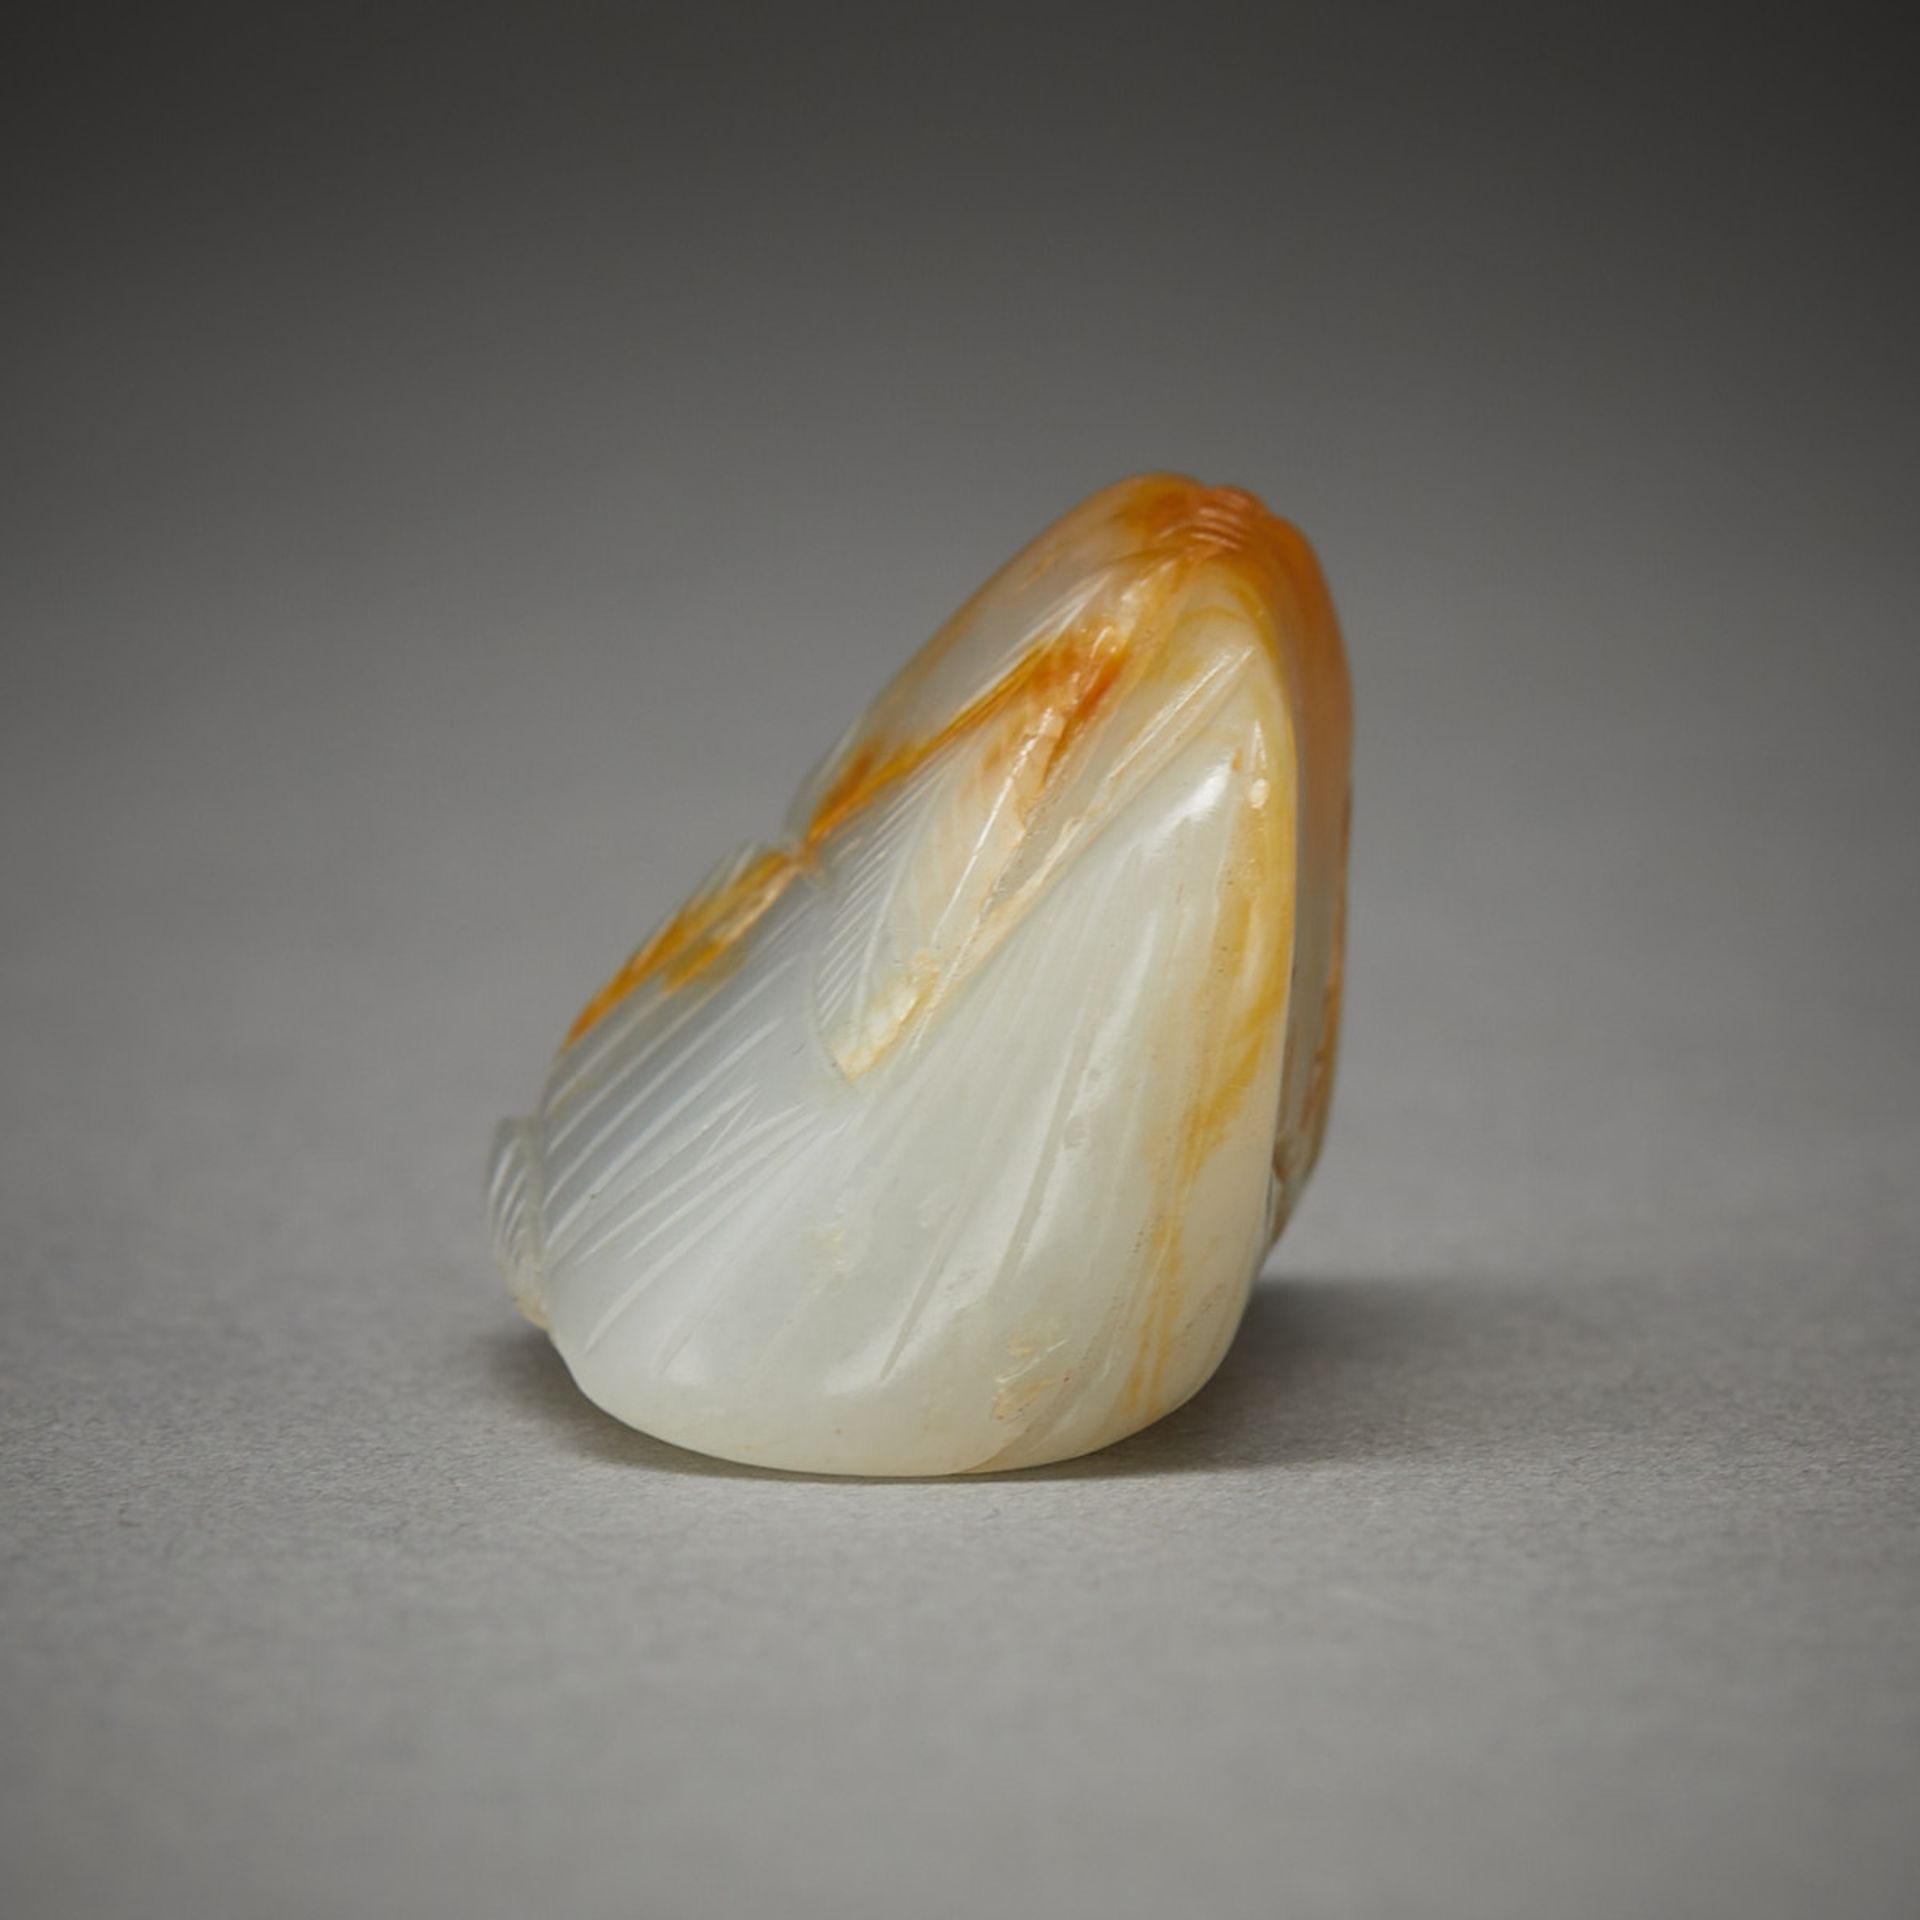 Chinese Carved Jade Fish - Image 3 of 8